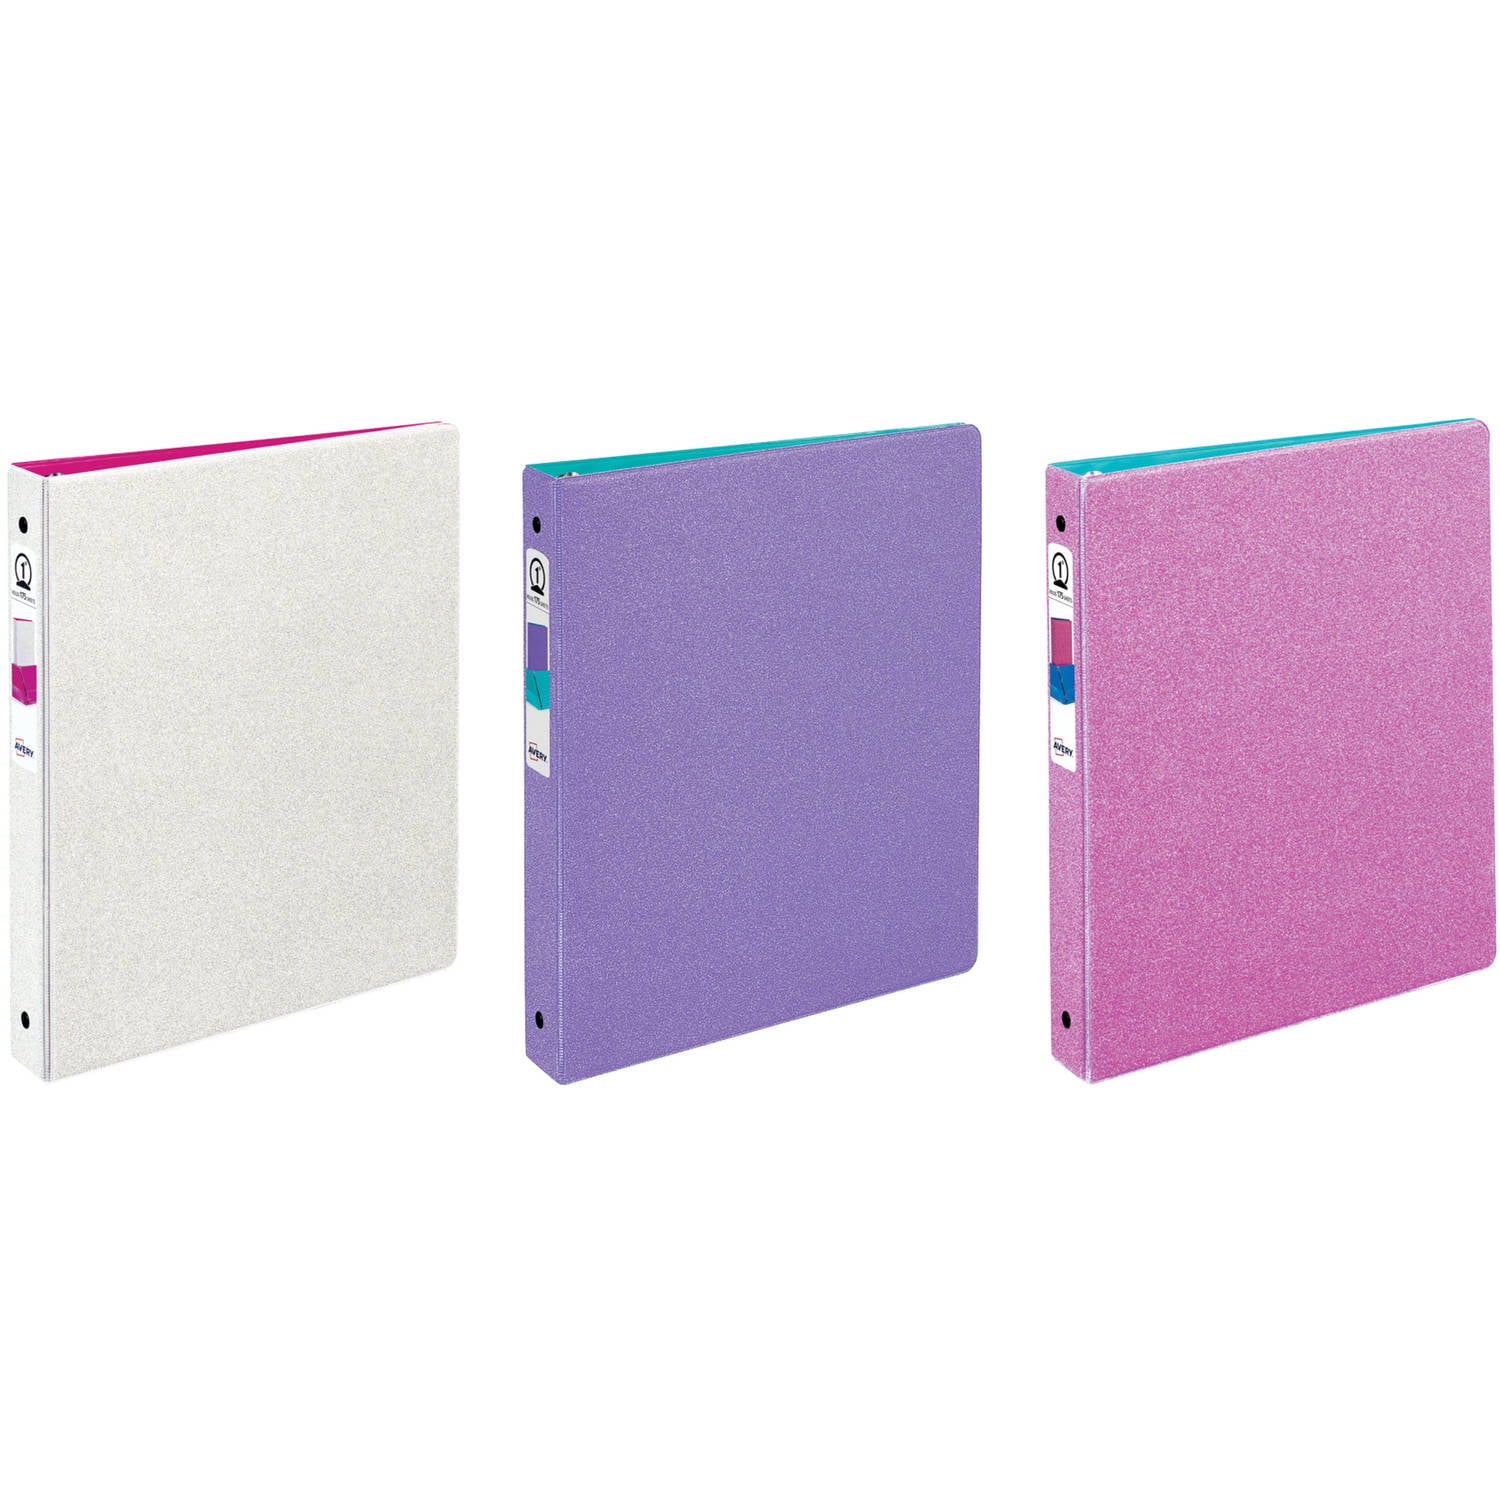 1 Binder 175-Sheet Capacity Avery Glitter Binder with 1 Round Ring Color Will Vary 3239 